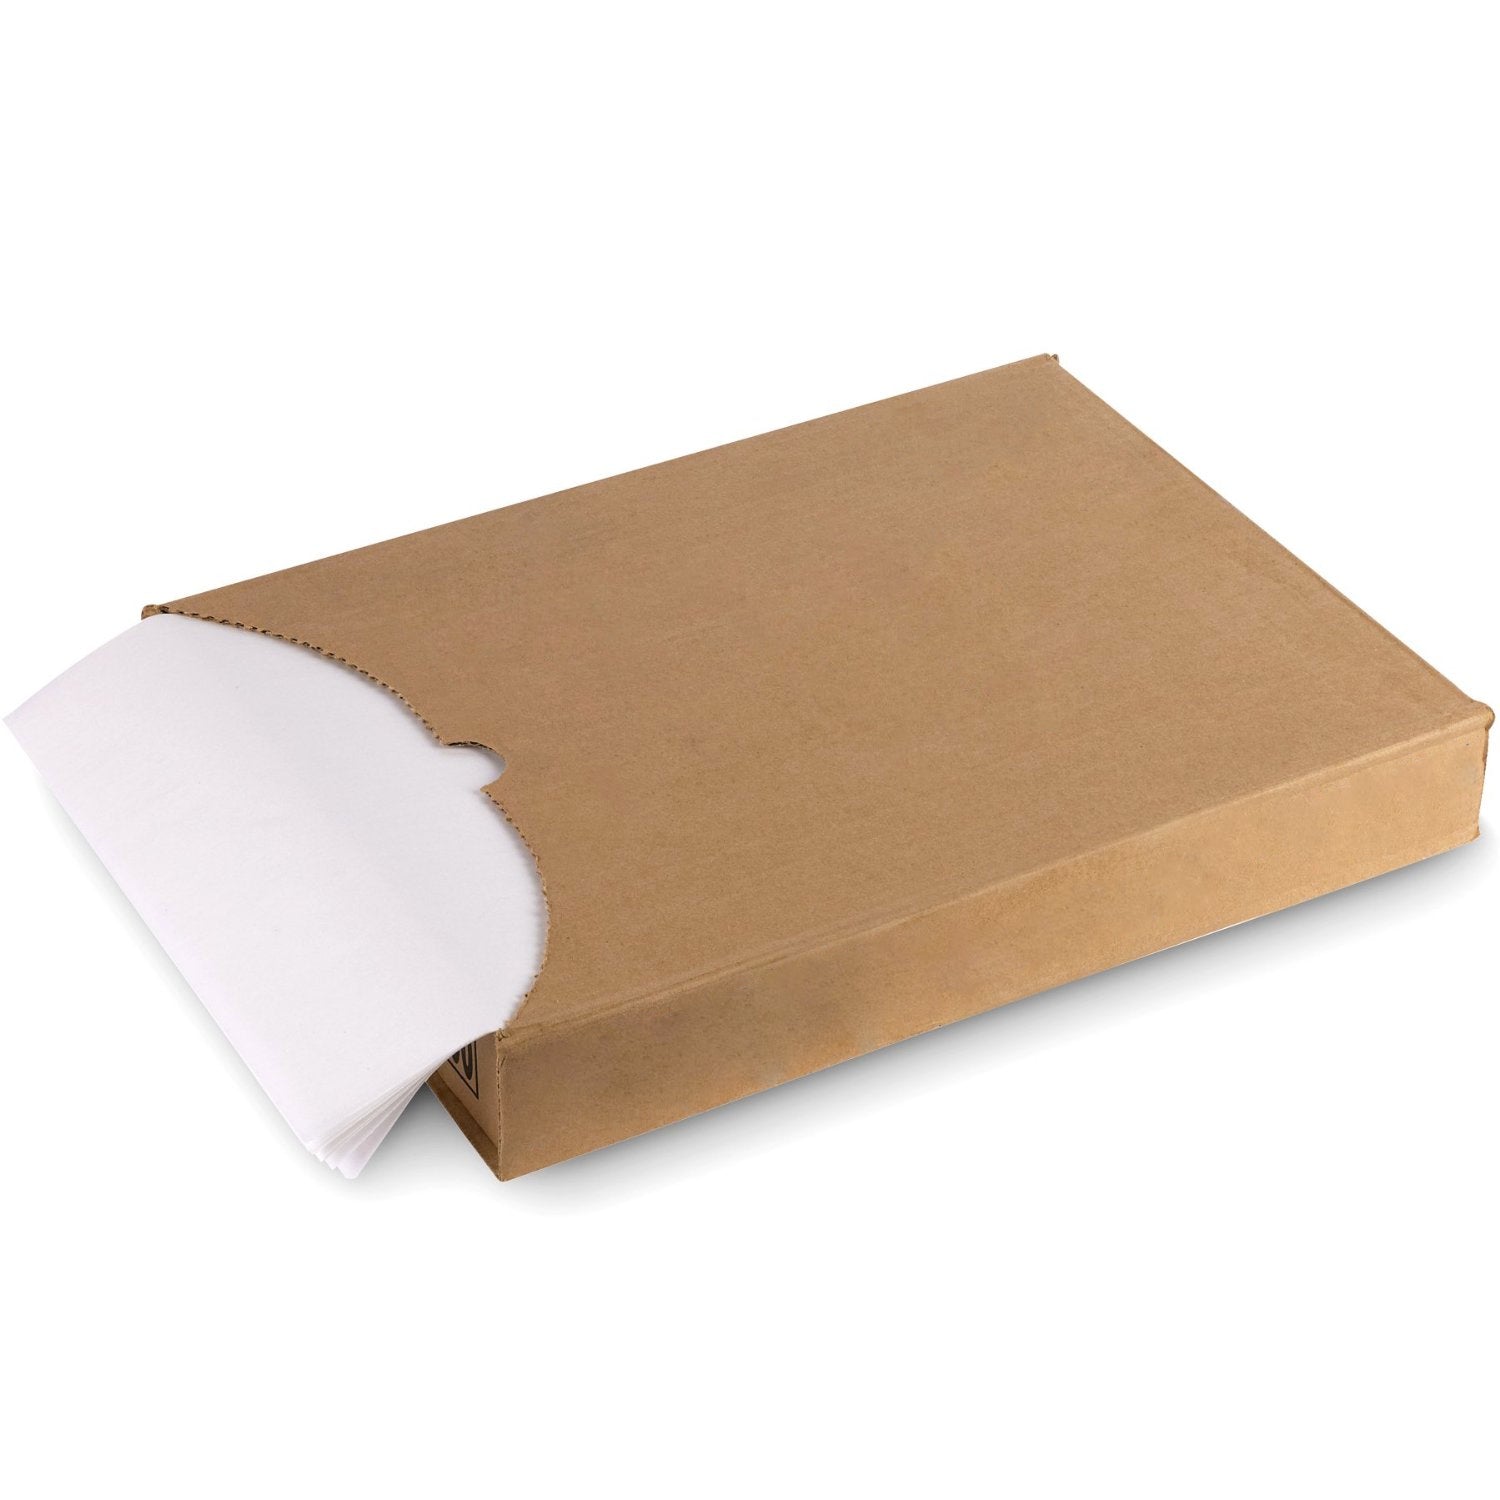 500 Silicone Sheets A3, parchment paper for heat press